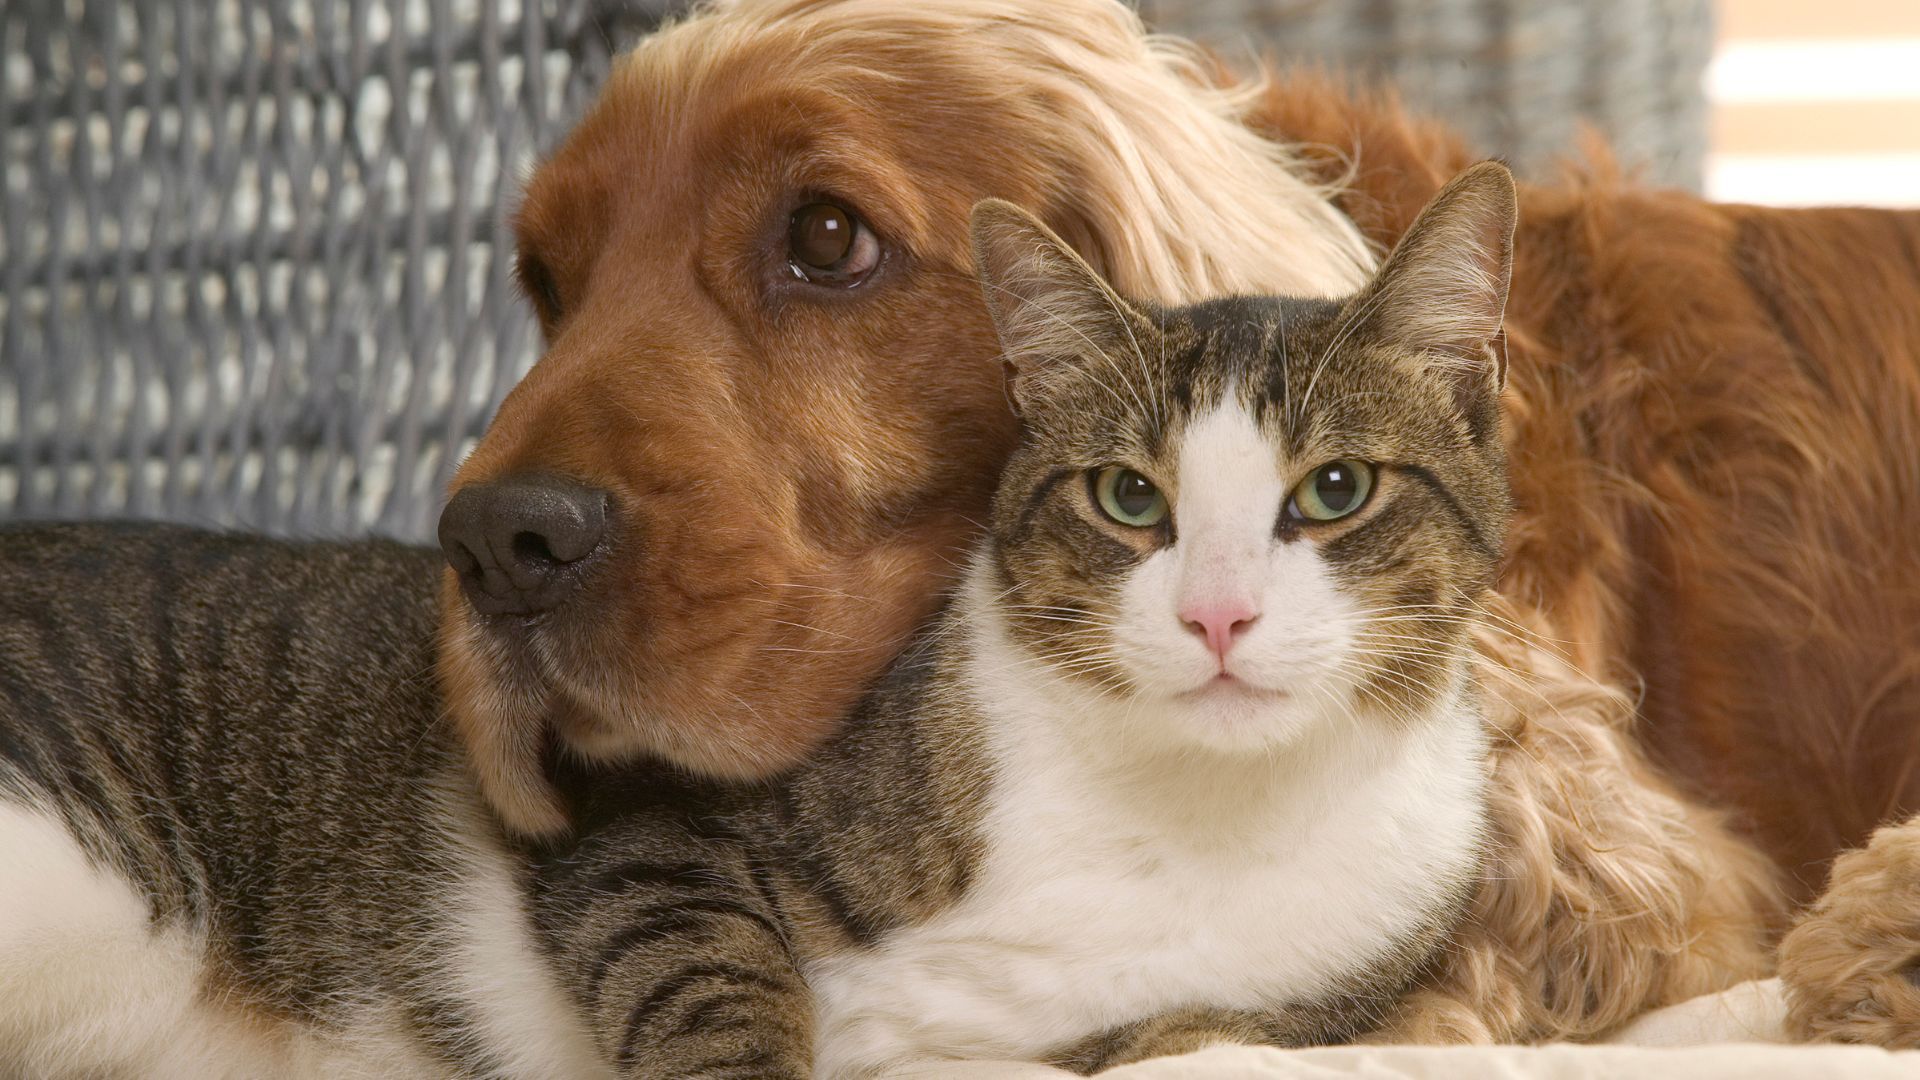 <p>                     It’s a debate as old as time: which makes for the better pet, a cat or a dog? After doing our research, we’ve come to the conclusion that our feline friends make for easier, cleaner and <em>more</em> hassle-free pets.                   </p>                                      <p>                     For example, did you know that cats can live for longer than their four-legged furry counterparts? And that they usually require less training than dogs? Plus, if you’re strapped for time but would love to reap all the rewards pets can bring, cats don’t require a lengthy daily walk. Generally speaking, cats tend to walk themselves and keep active playing with their toys or from jumping on high perches. While they do need mental stimulation, they can often get their fix through puzzle toys, scratching posts and by flexing their hunting instincts by playing with a cat wand.                   </p>                                      <p>                     So, as you can see there are lots of perks to having a cat as a pet. And we’re only just getting started.                   </p>